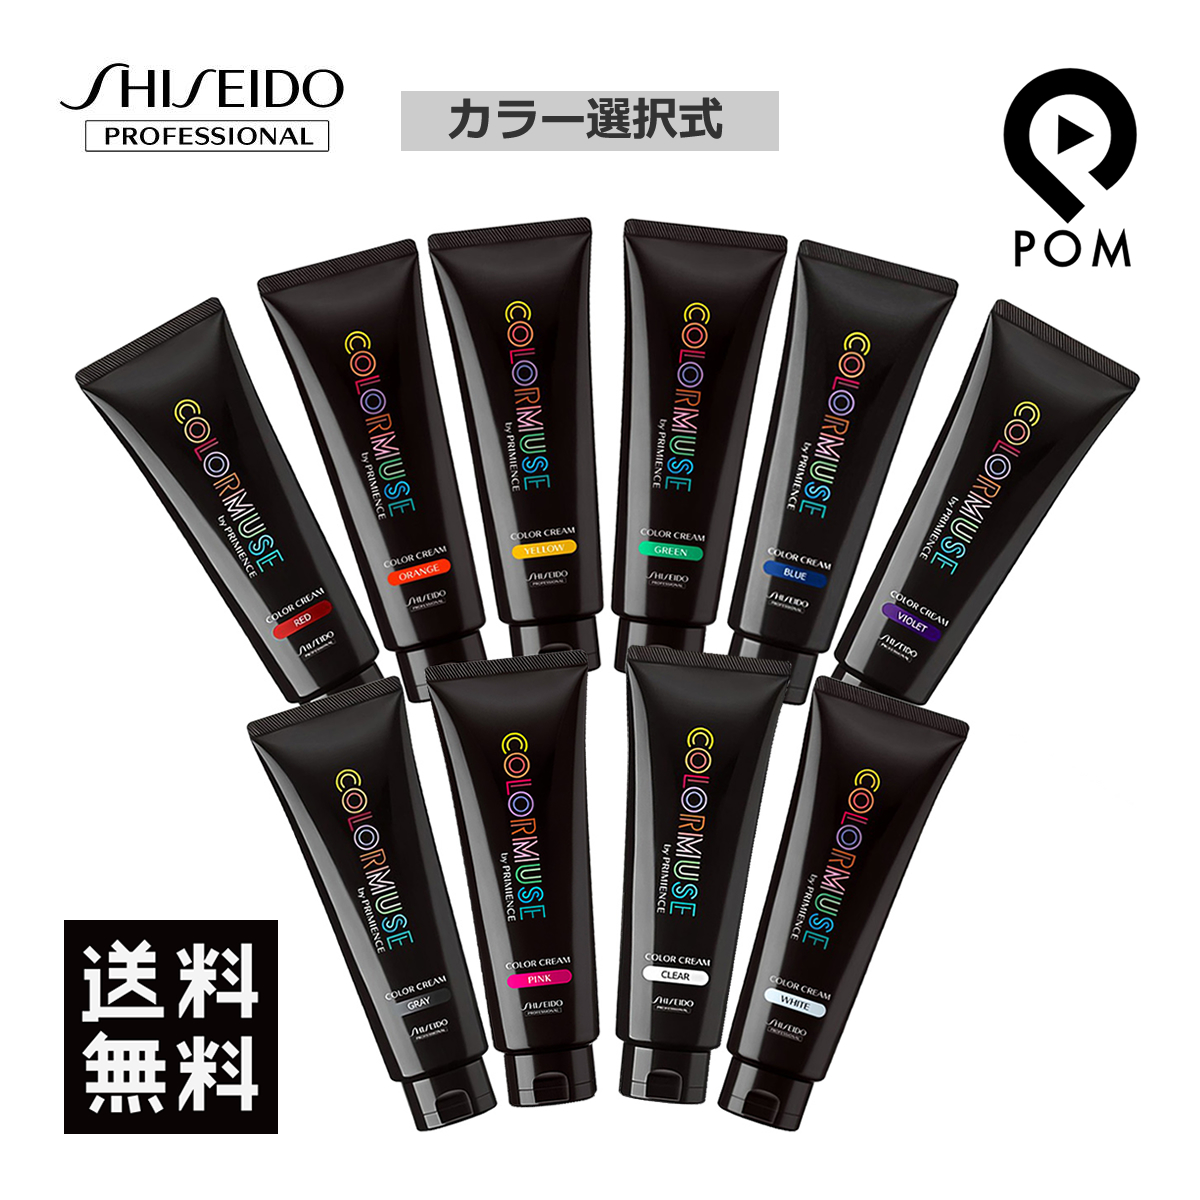  Shiseido color Mu zbaip limi en scalar cream 240g all 10 color from selection free shipping selection type COLORMUSE